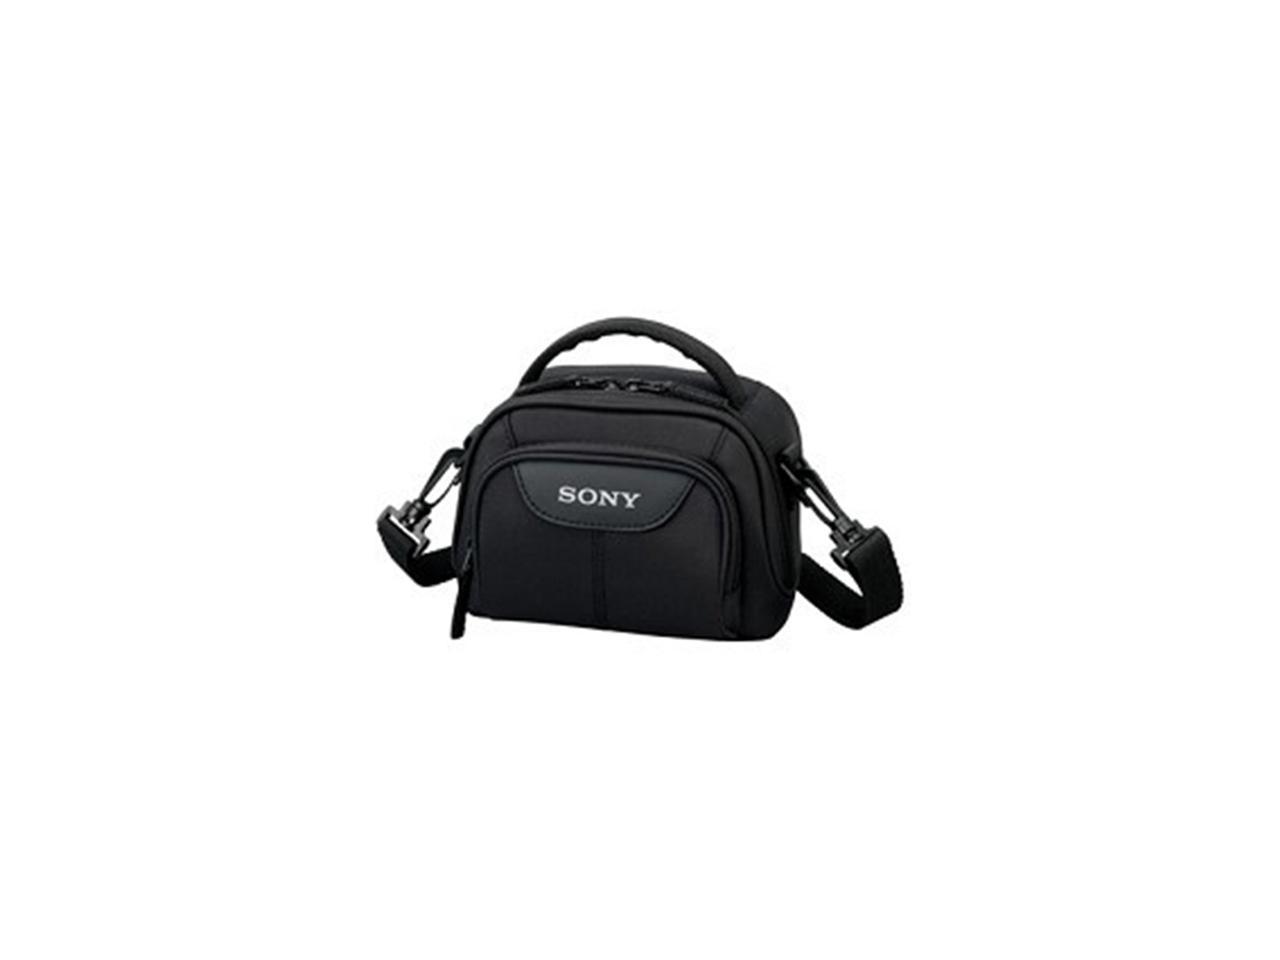 SONY LCS-VA15/B Video Camcorder Bags & Cases Black Stylish Soft Case ...